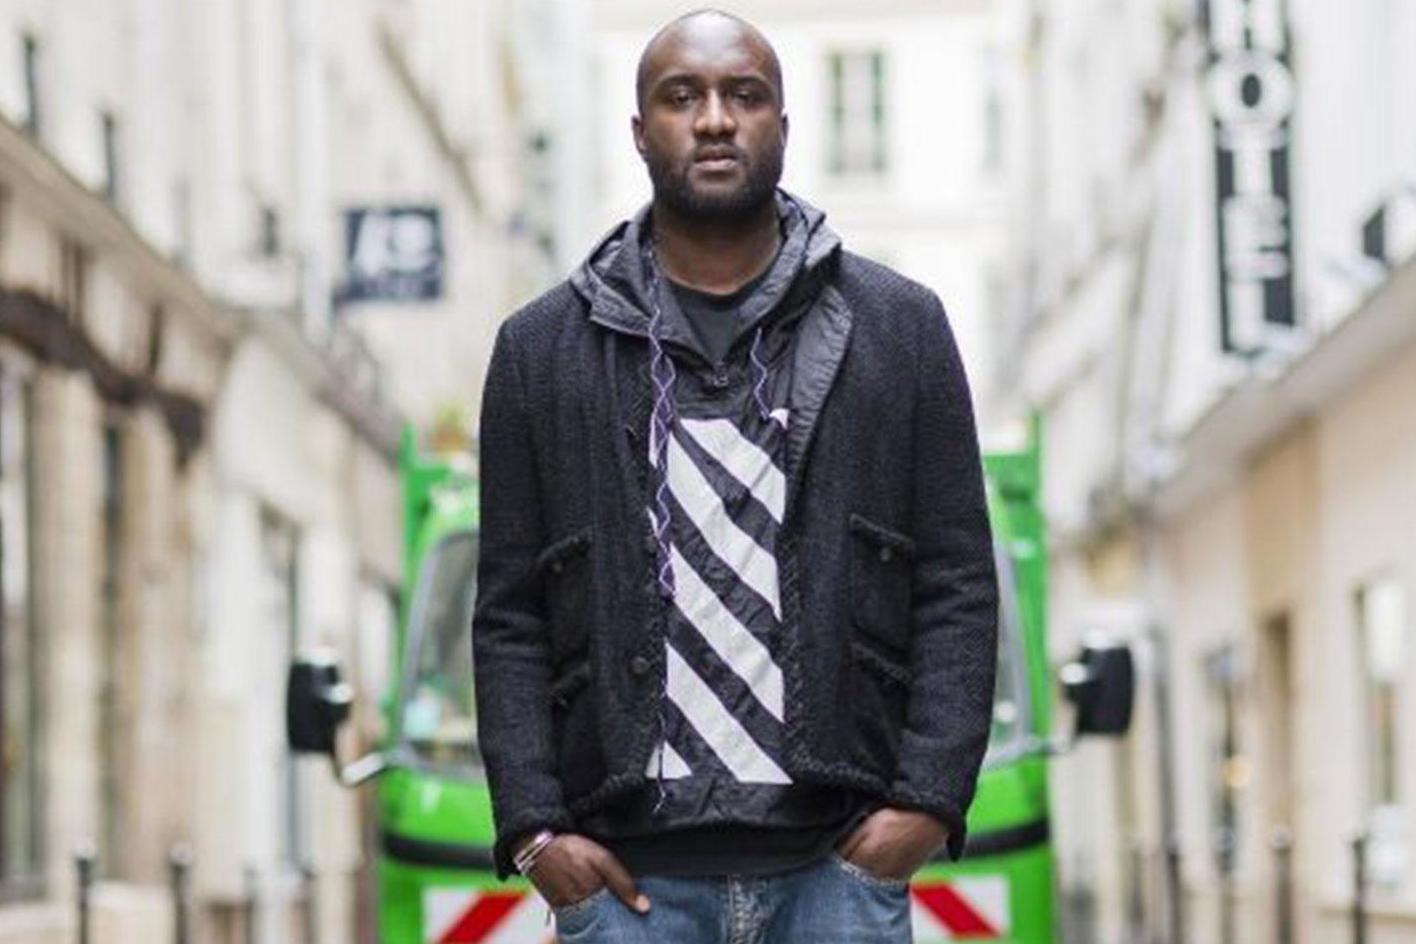 Kanye West's creative director Virgil Abloh launches streetwear clothing  line - NZ Herald